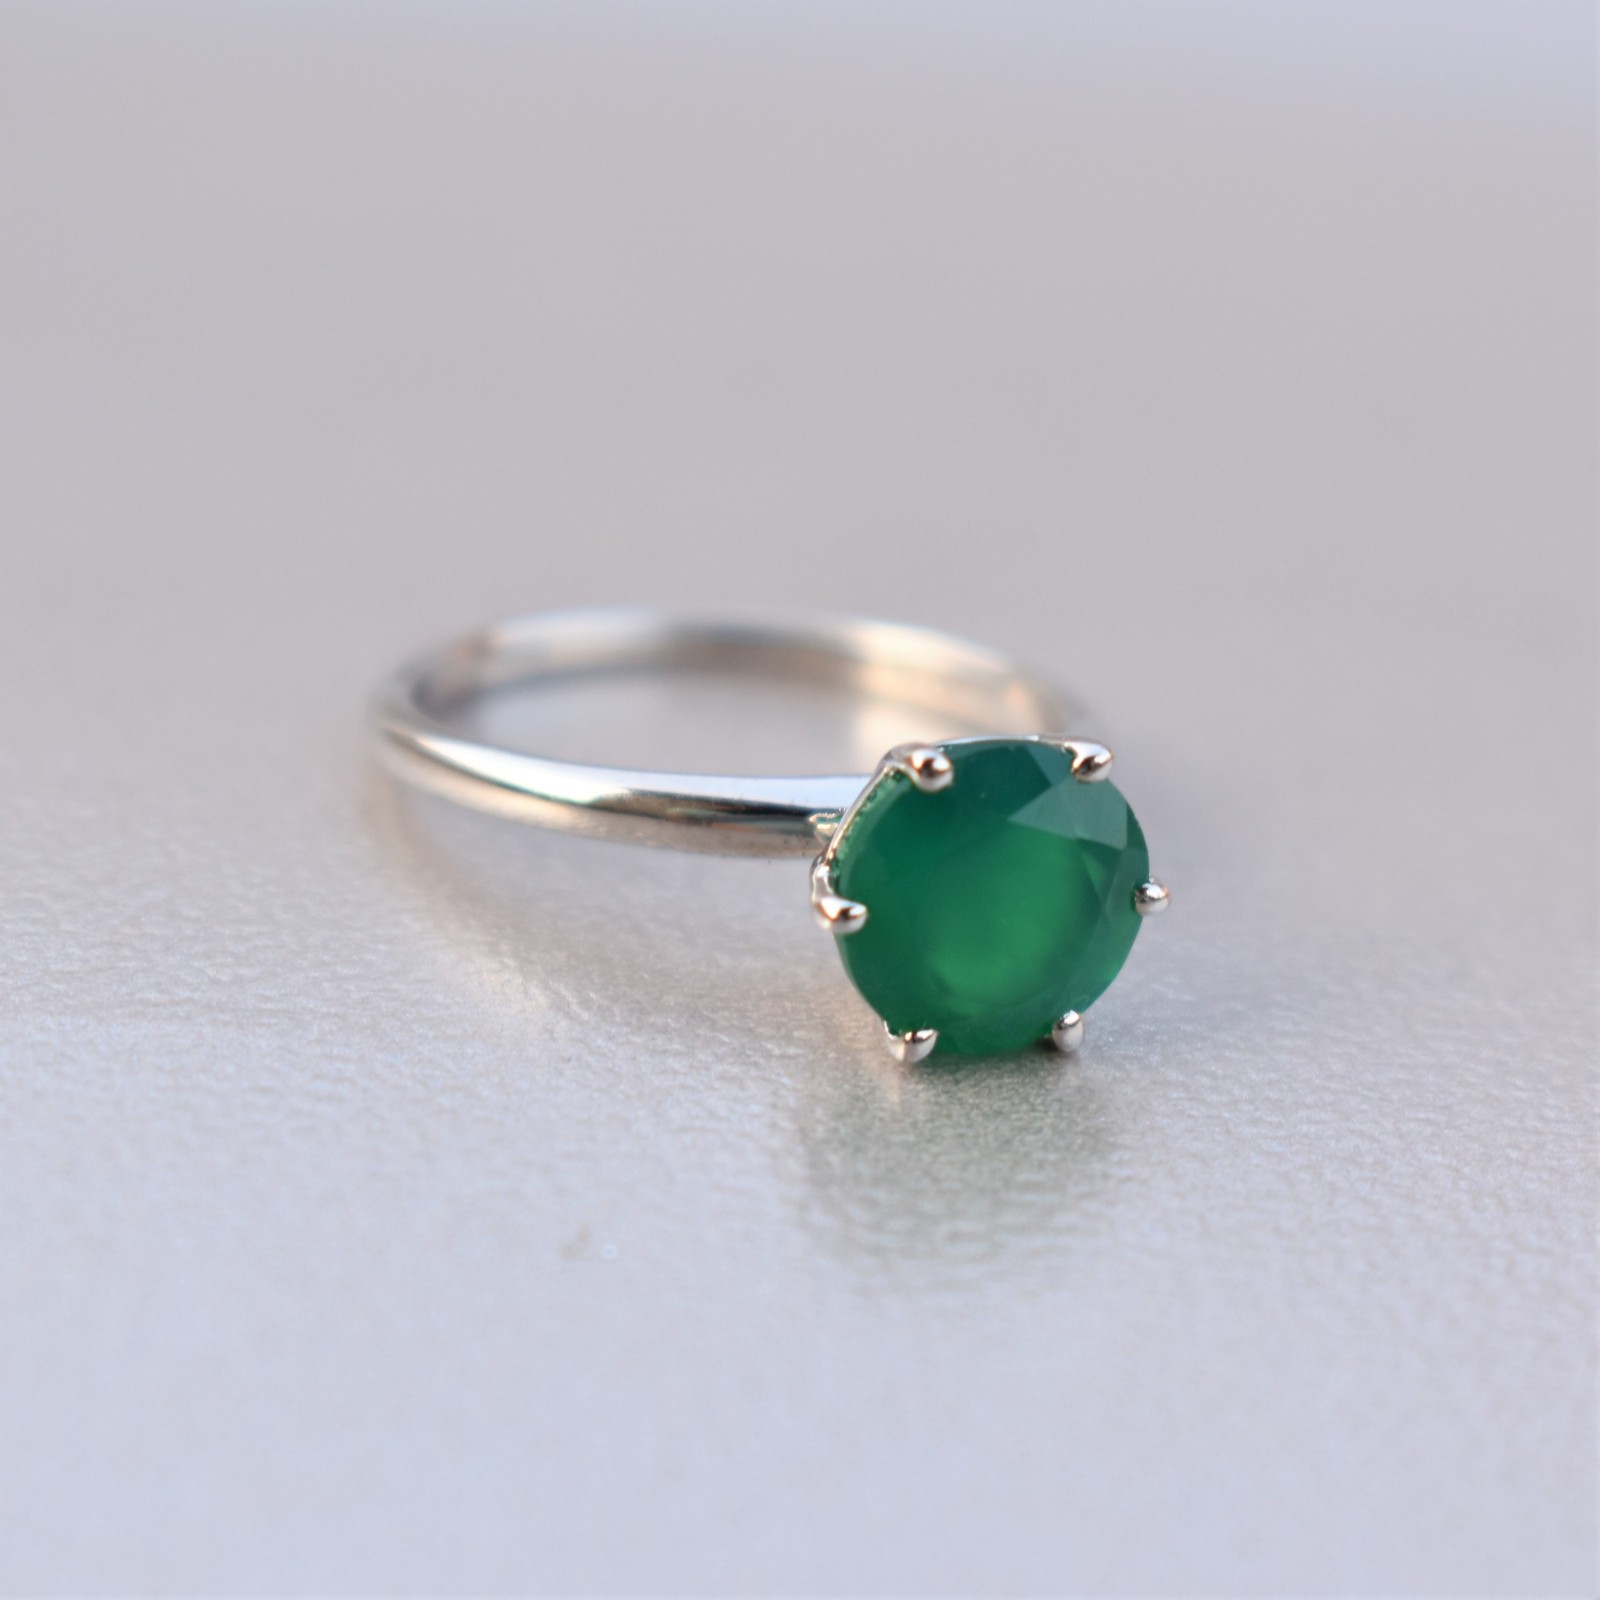 Primary image for Green Onyx Ring | 925 Sterling Silver Ring | Statement Ring | Cocktail Ring | 